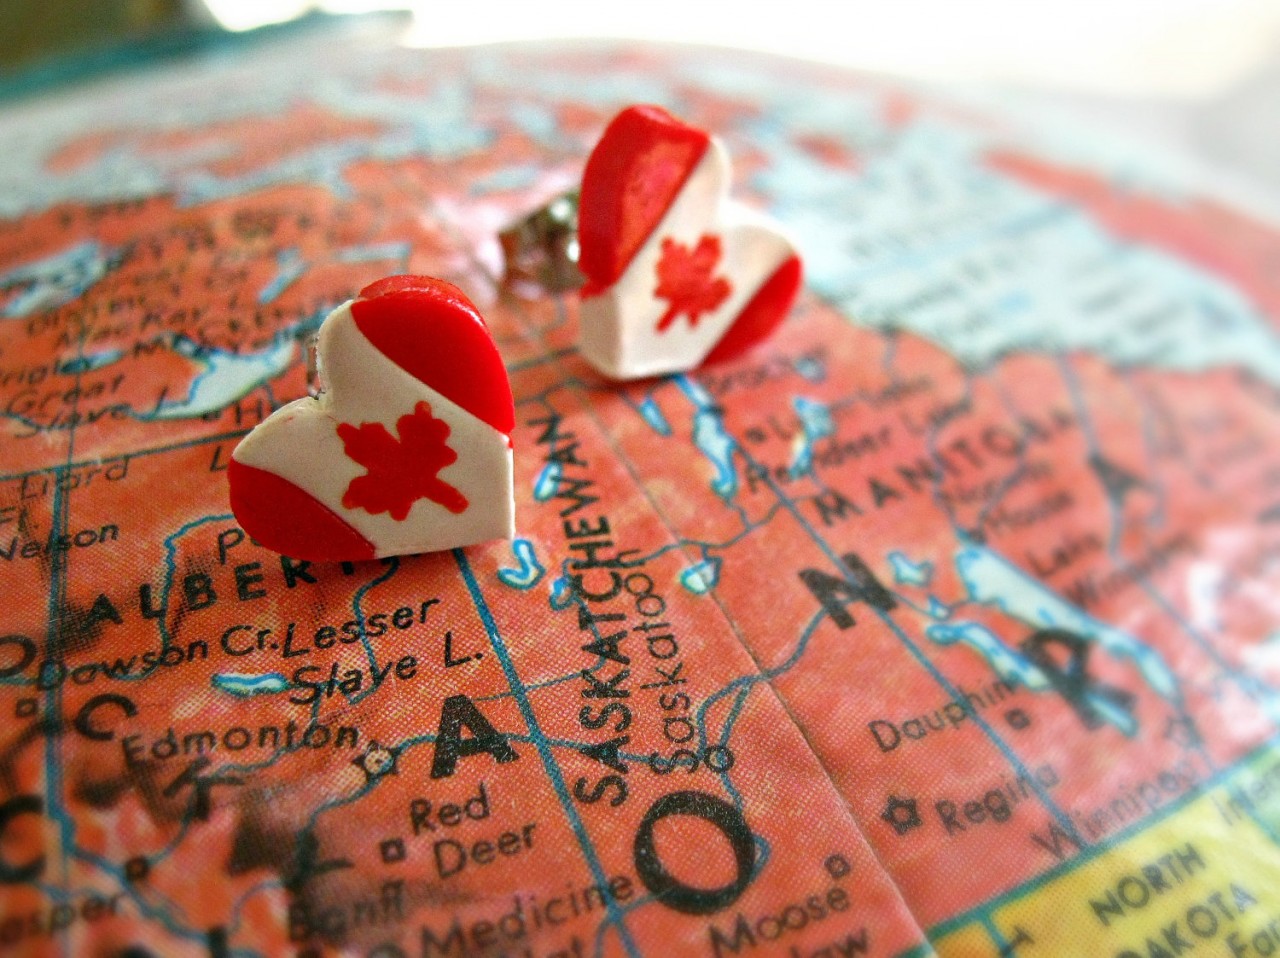 Canadians Feel The Most Brand Love From Their Banks According To